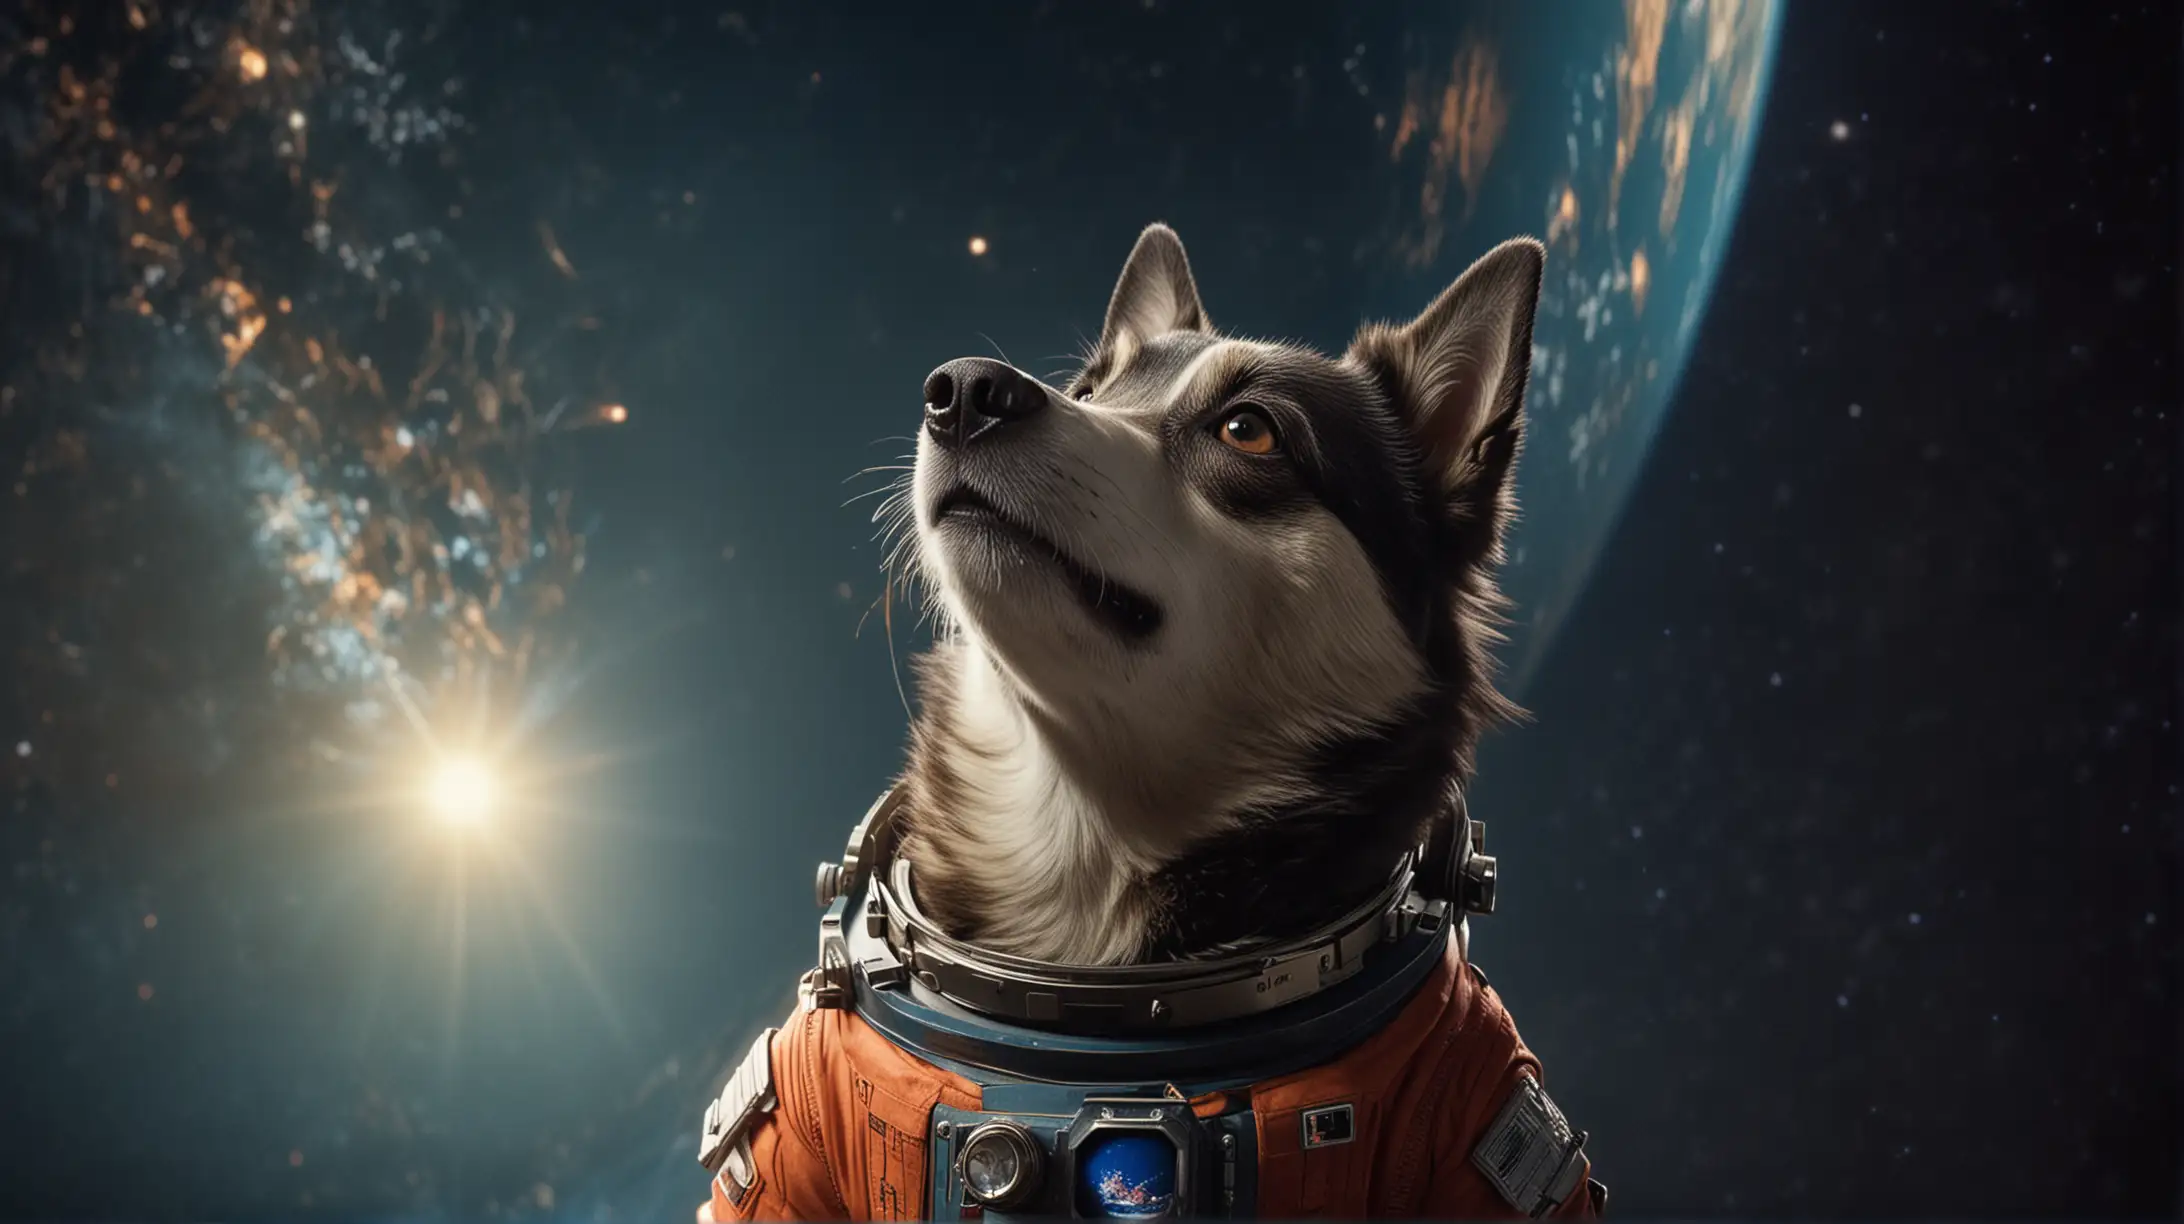 Laika the Space Dog in Cosmic Costume Gazes at Earth